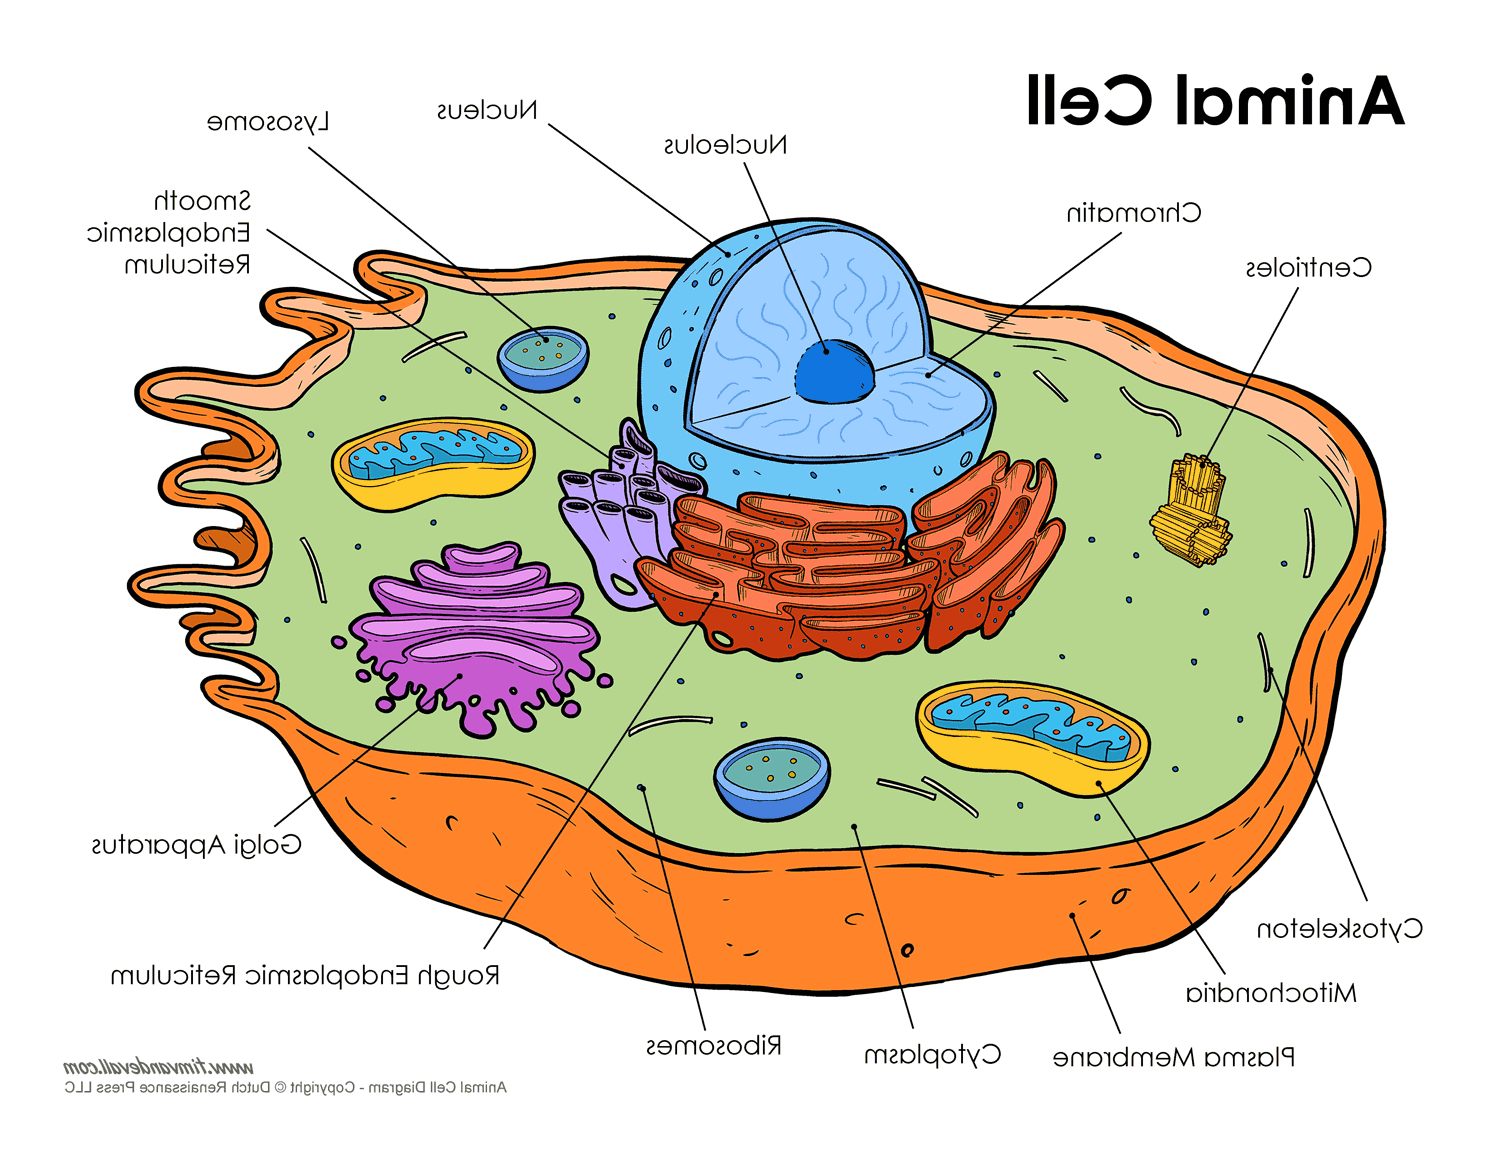 Animal Cell Drawing at GetDrawings | Free download